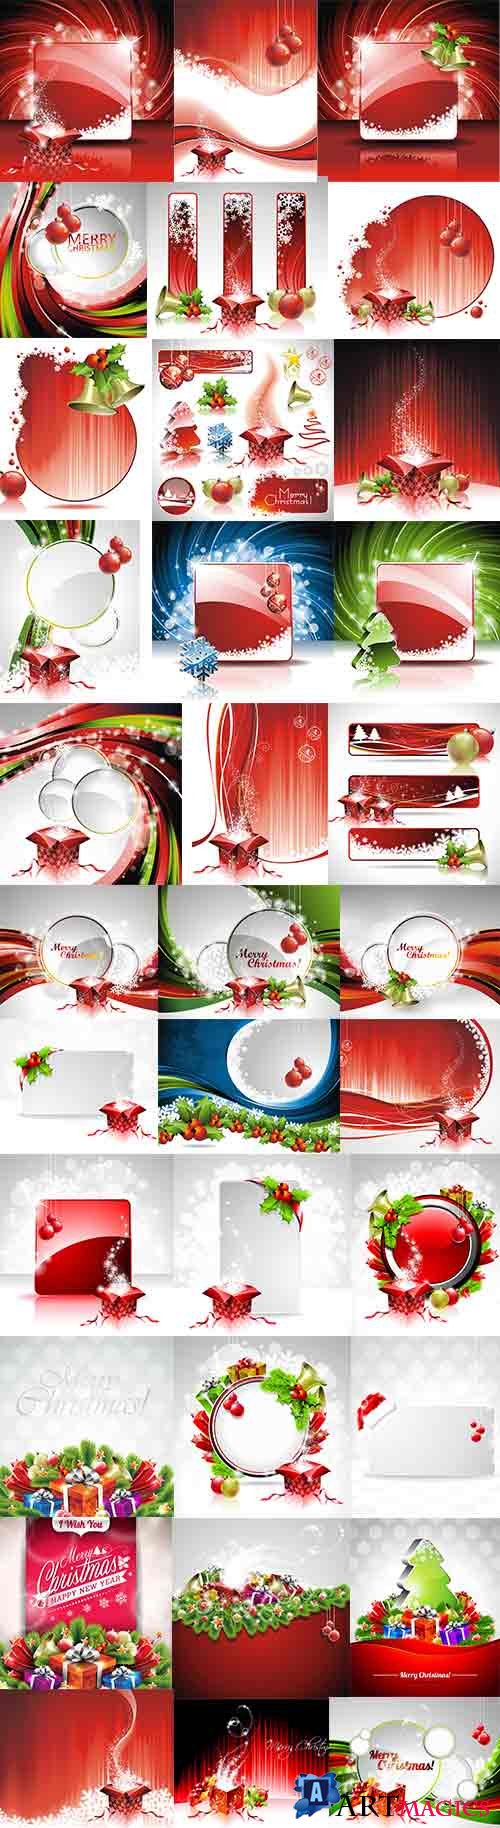   - 5 -   / Christmas backgrounds -5 - Vector Graphics